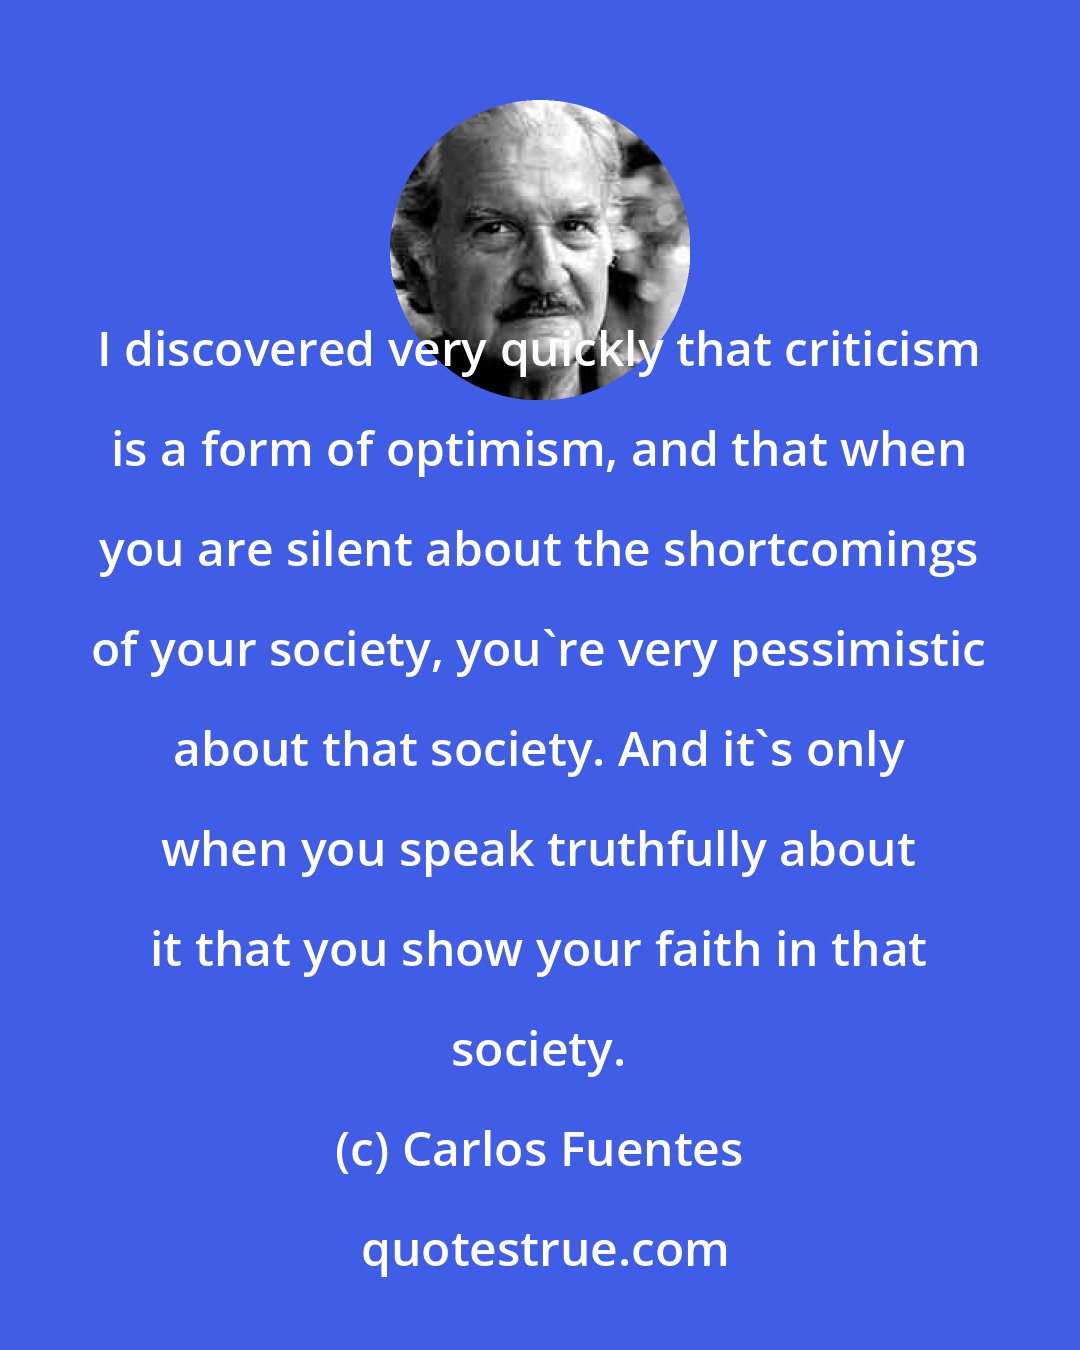 Carlos Fuentes: I discovered very quickly that criticism is a form of optimism, and that when you are silent about the shortcomings of your society, you're very pessimistic about that society. And it's only when you speak truthfully about it that you show your faith in that society.